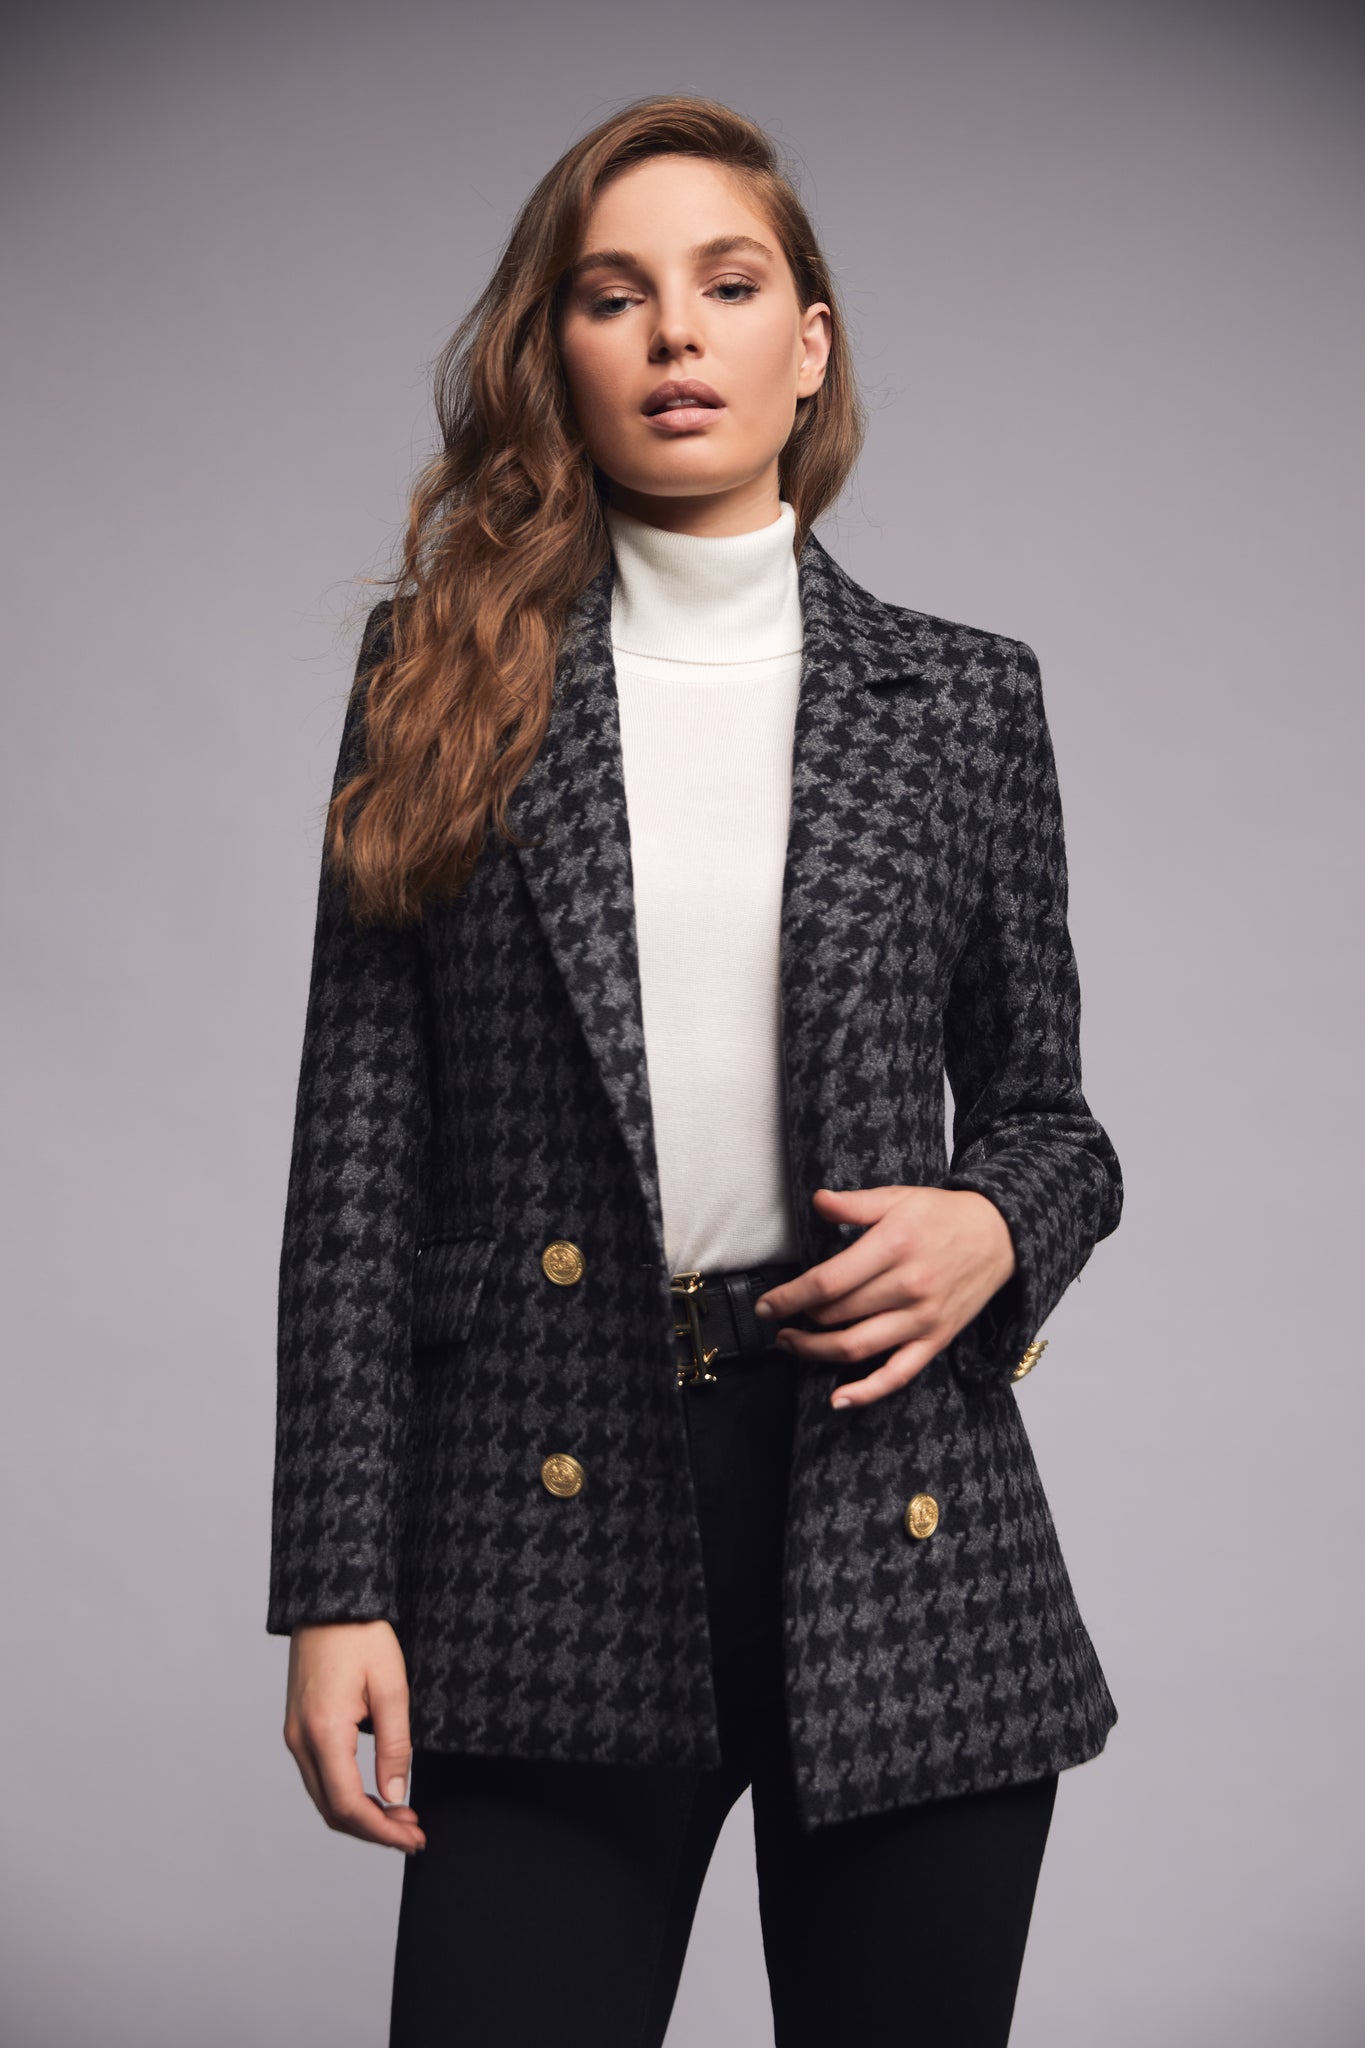 The Large Scale Charcoal Houndstooth Suit